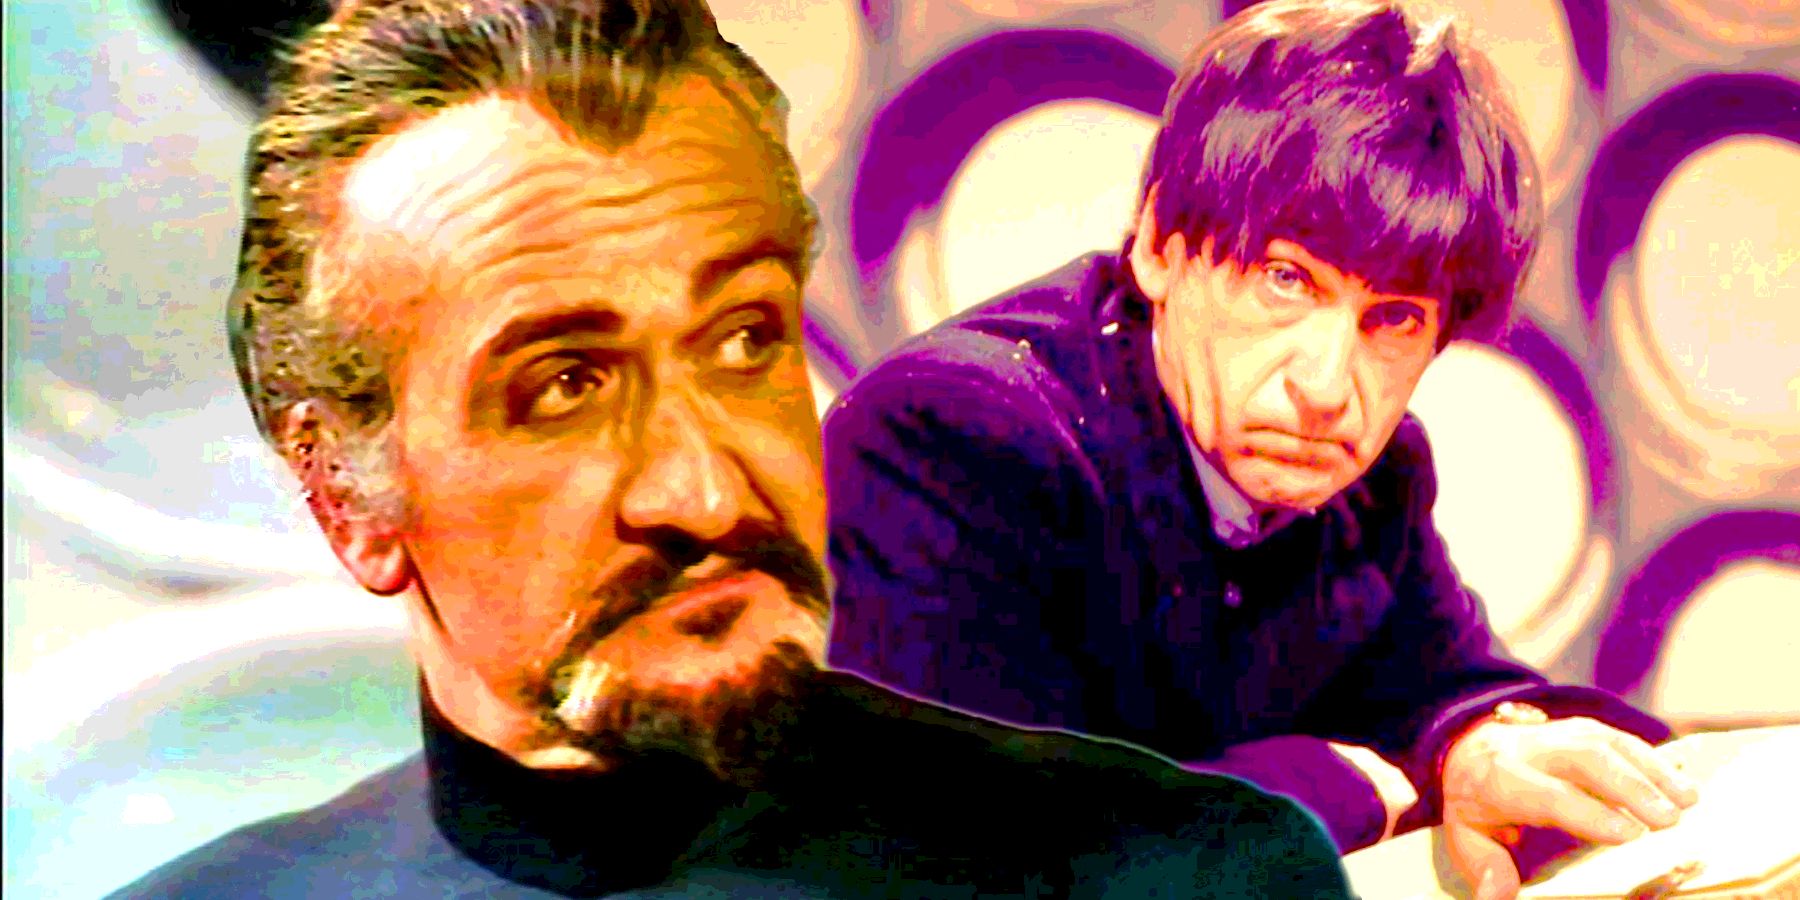 Roger Delgado's Master looking at the Second Doctor in his TARDIS